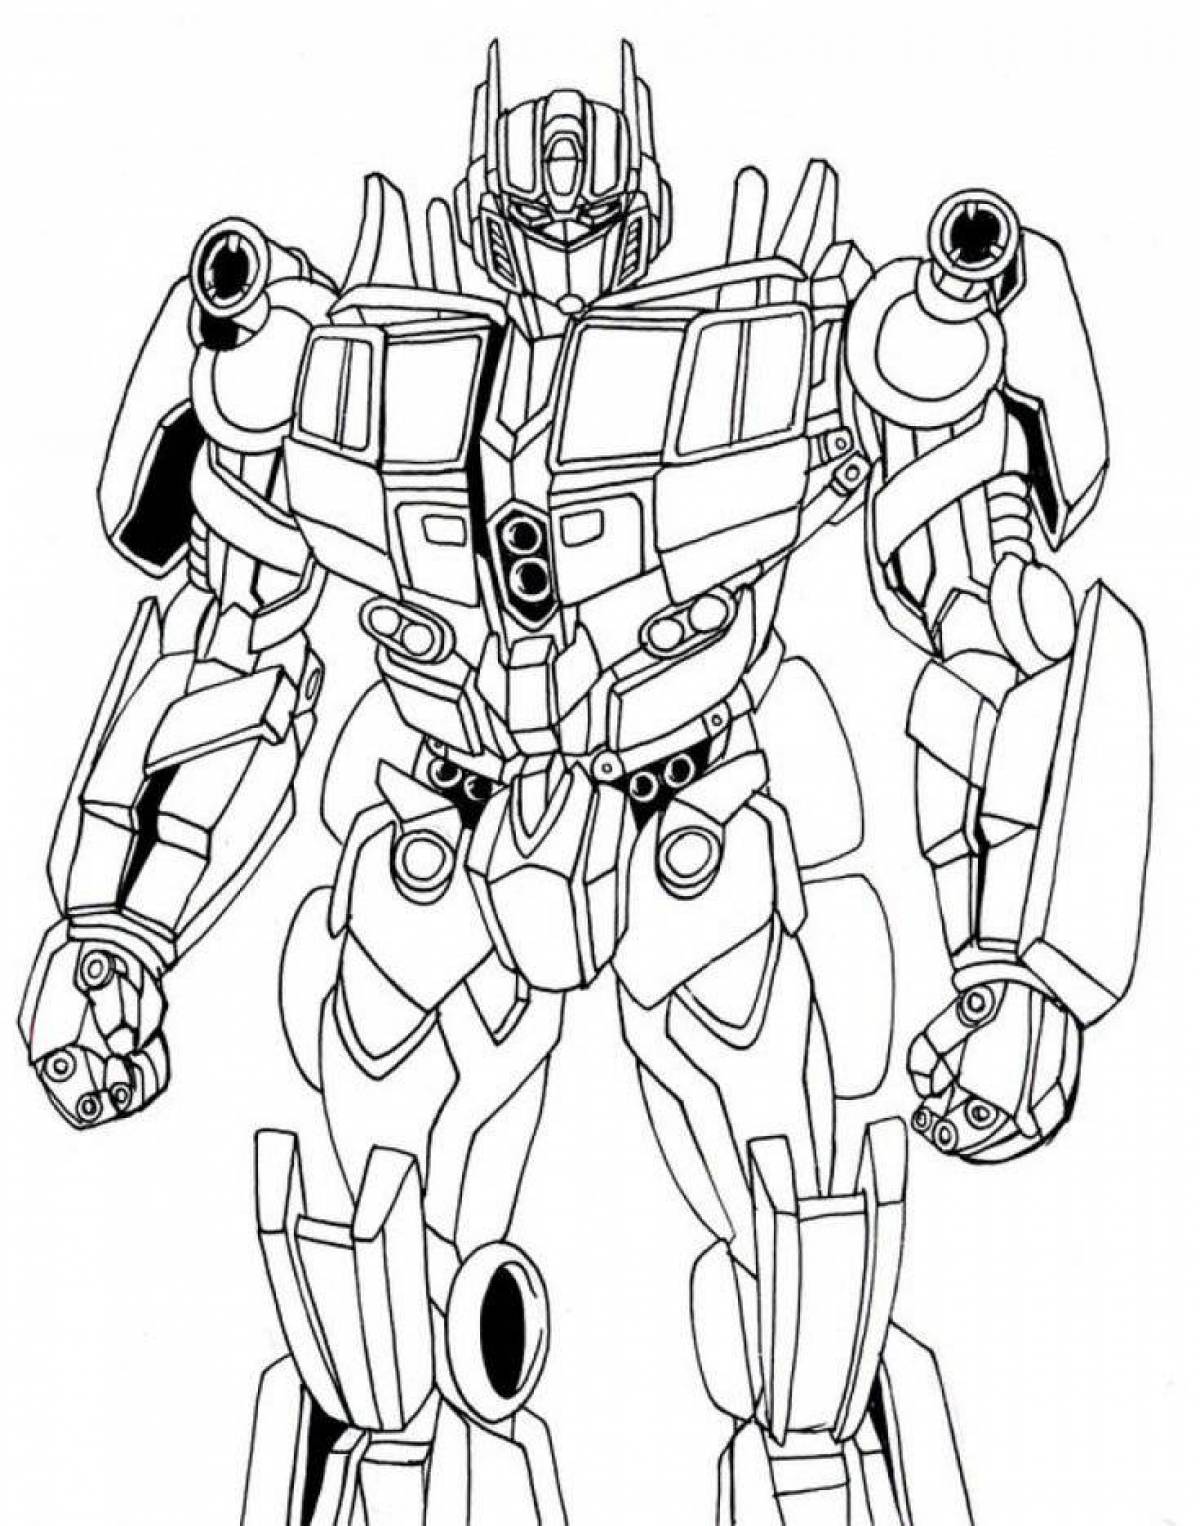 Fabulous transformers coloring pages for kids